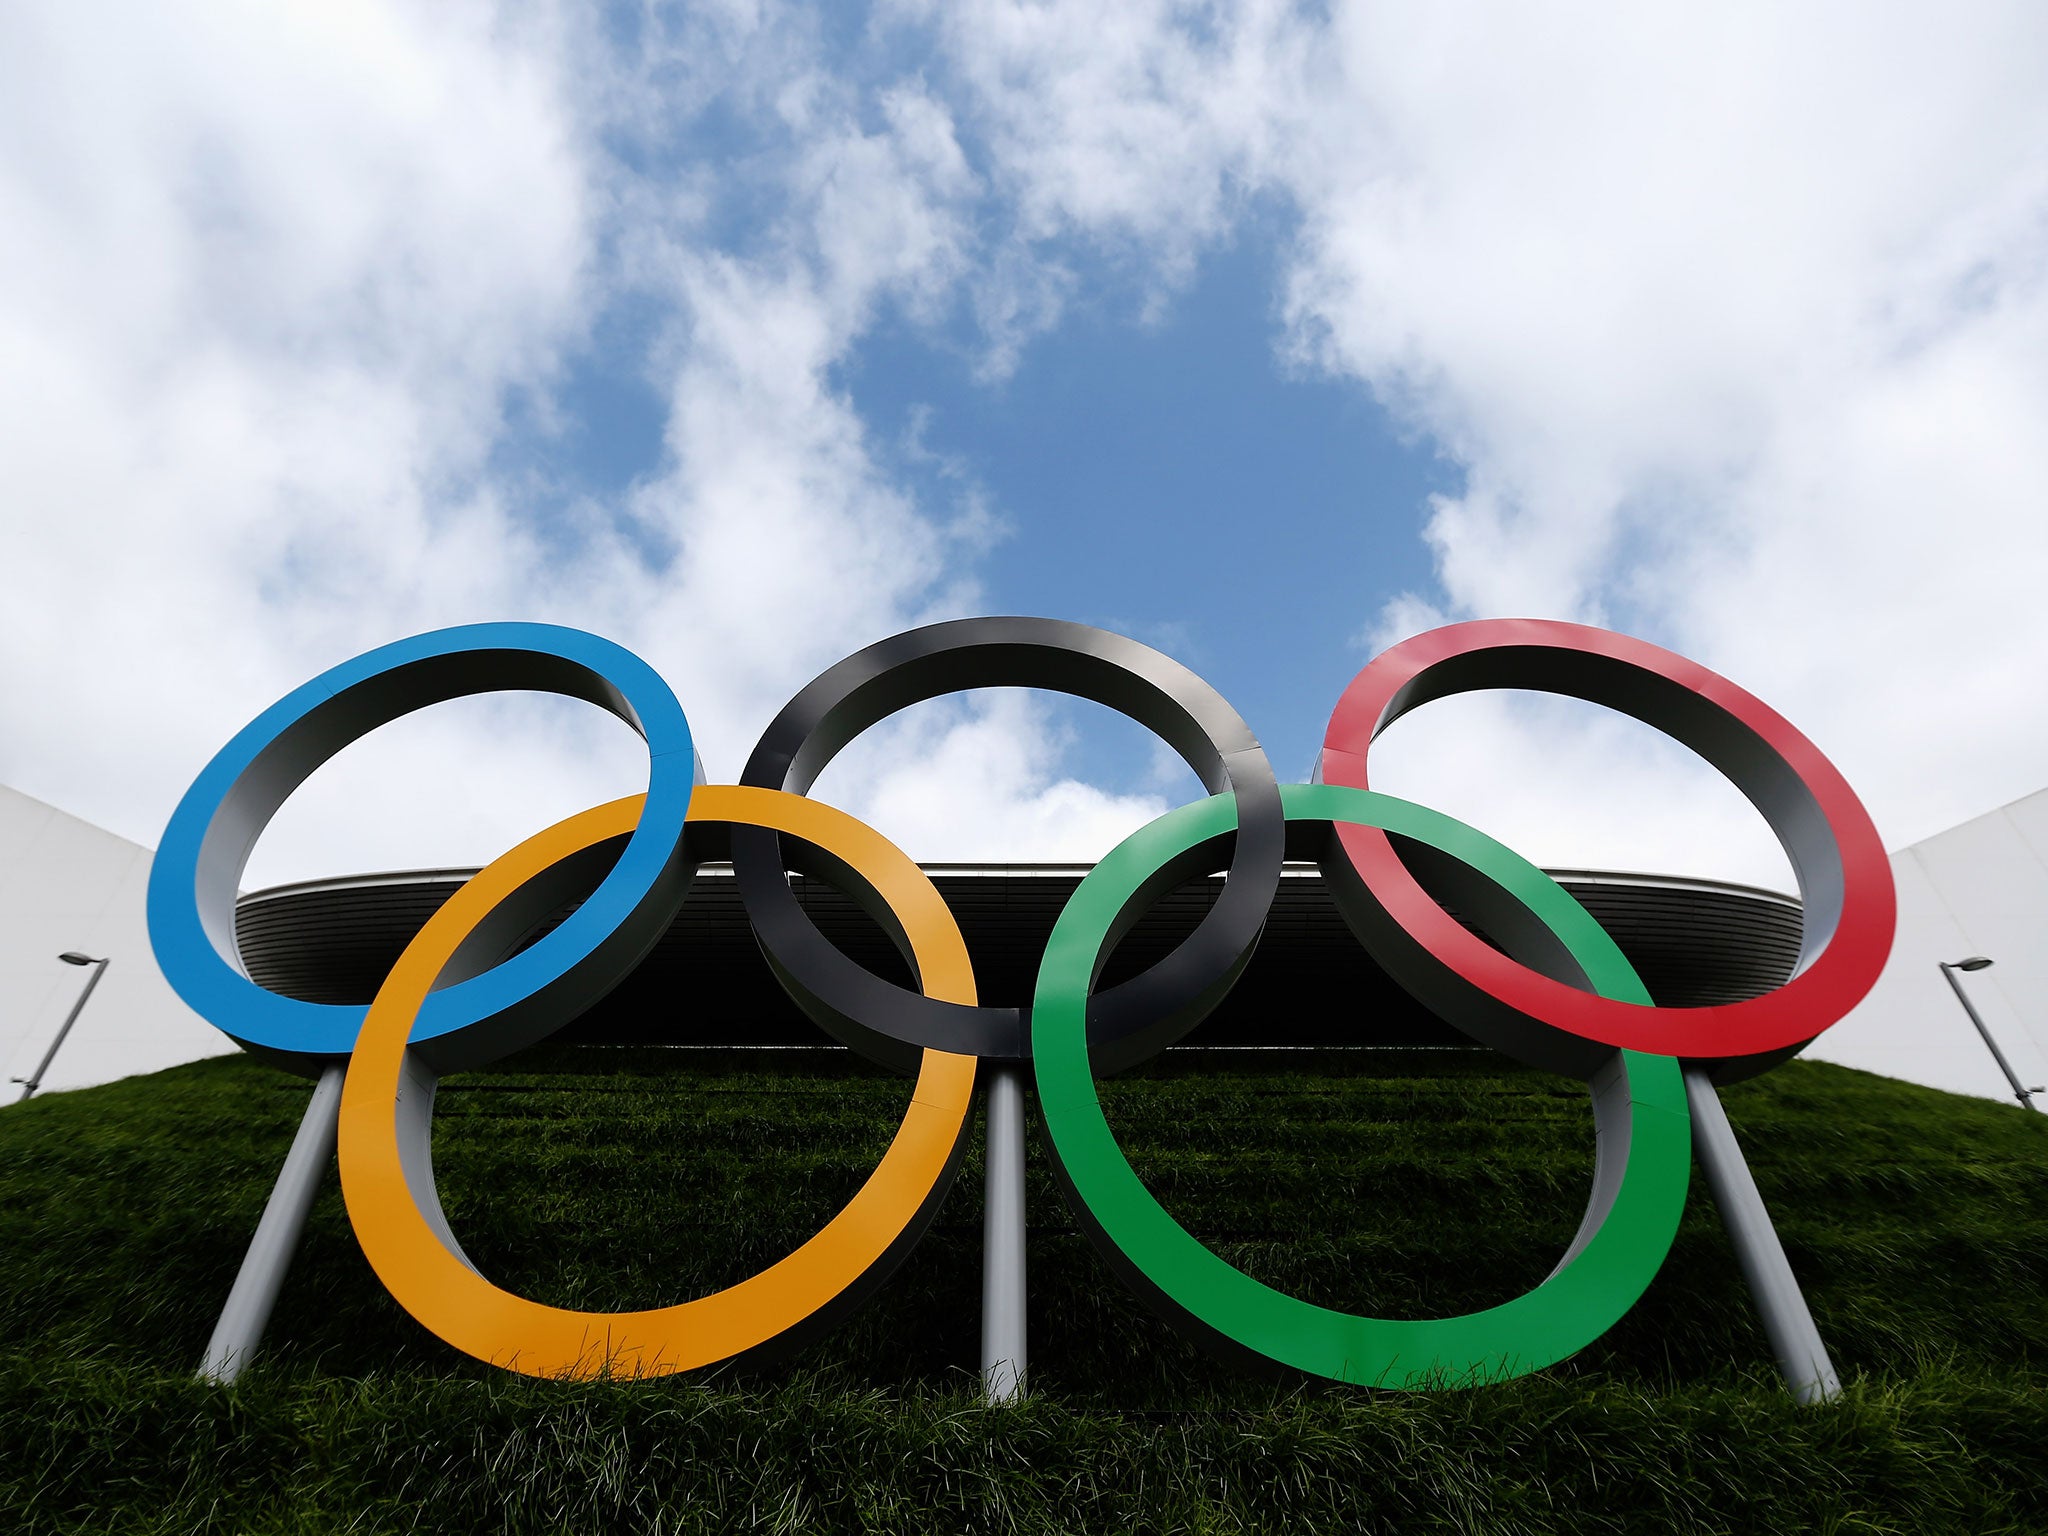 Five cities will bid for the right to host the 2024 Olympic Games